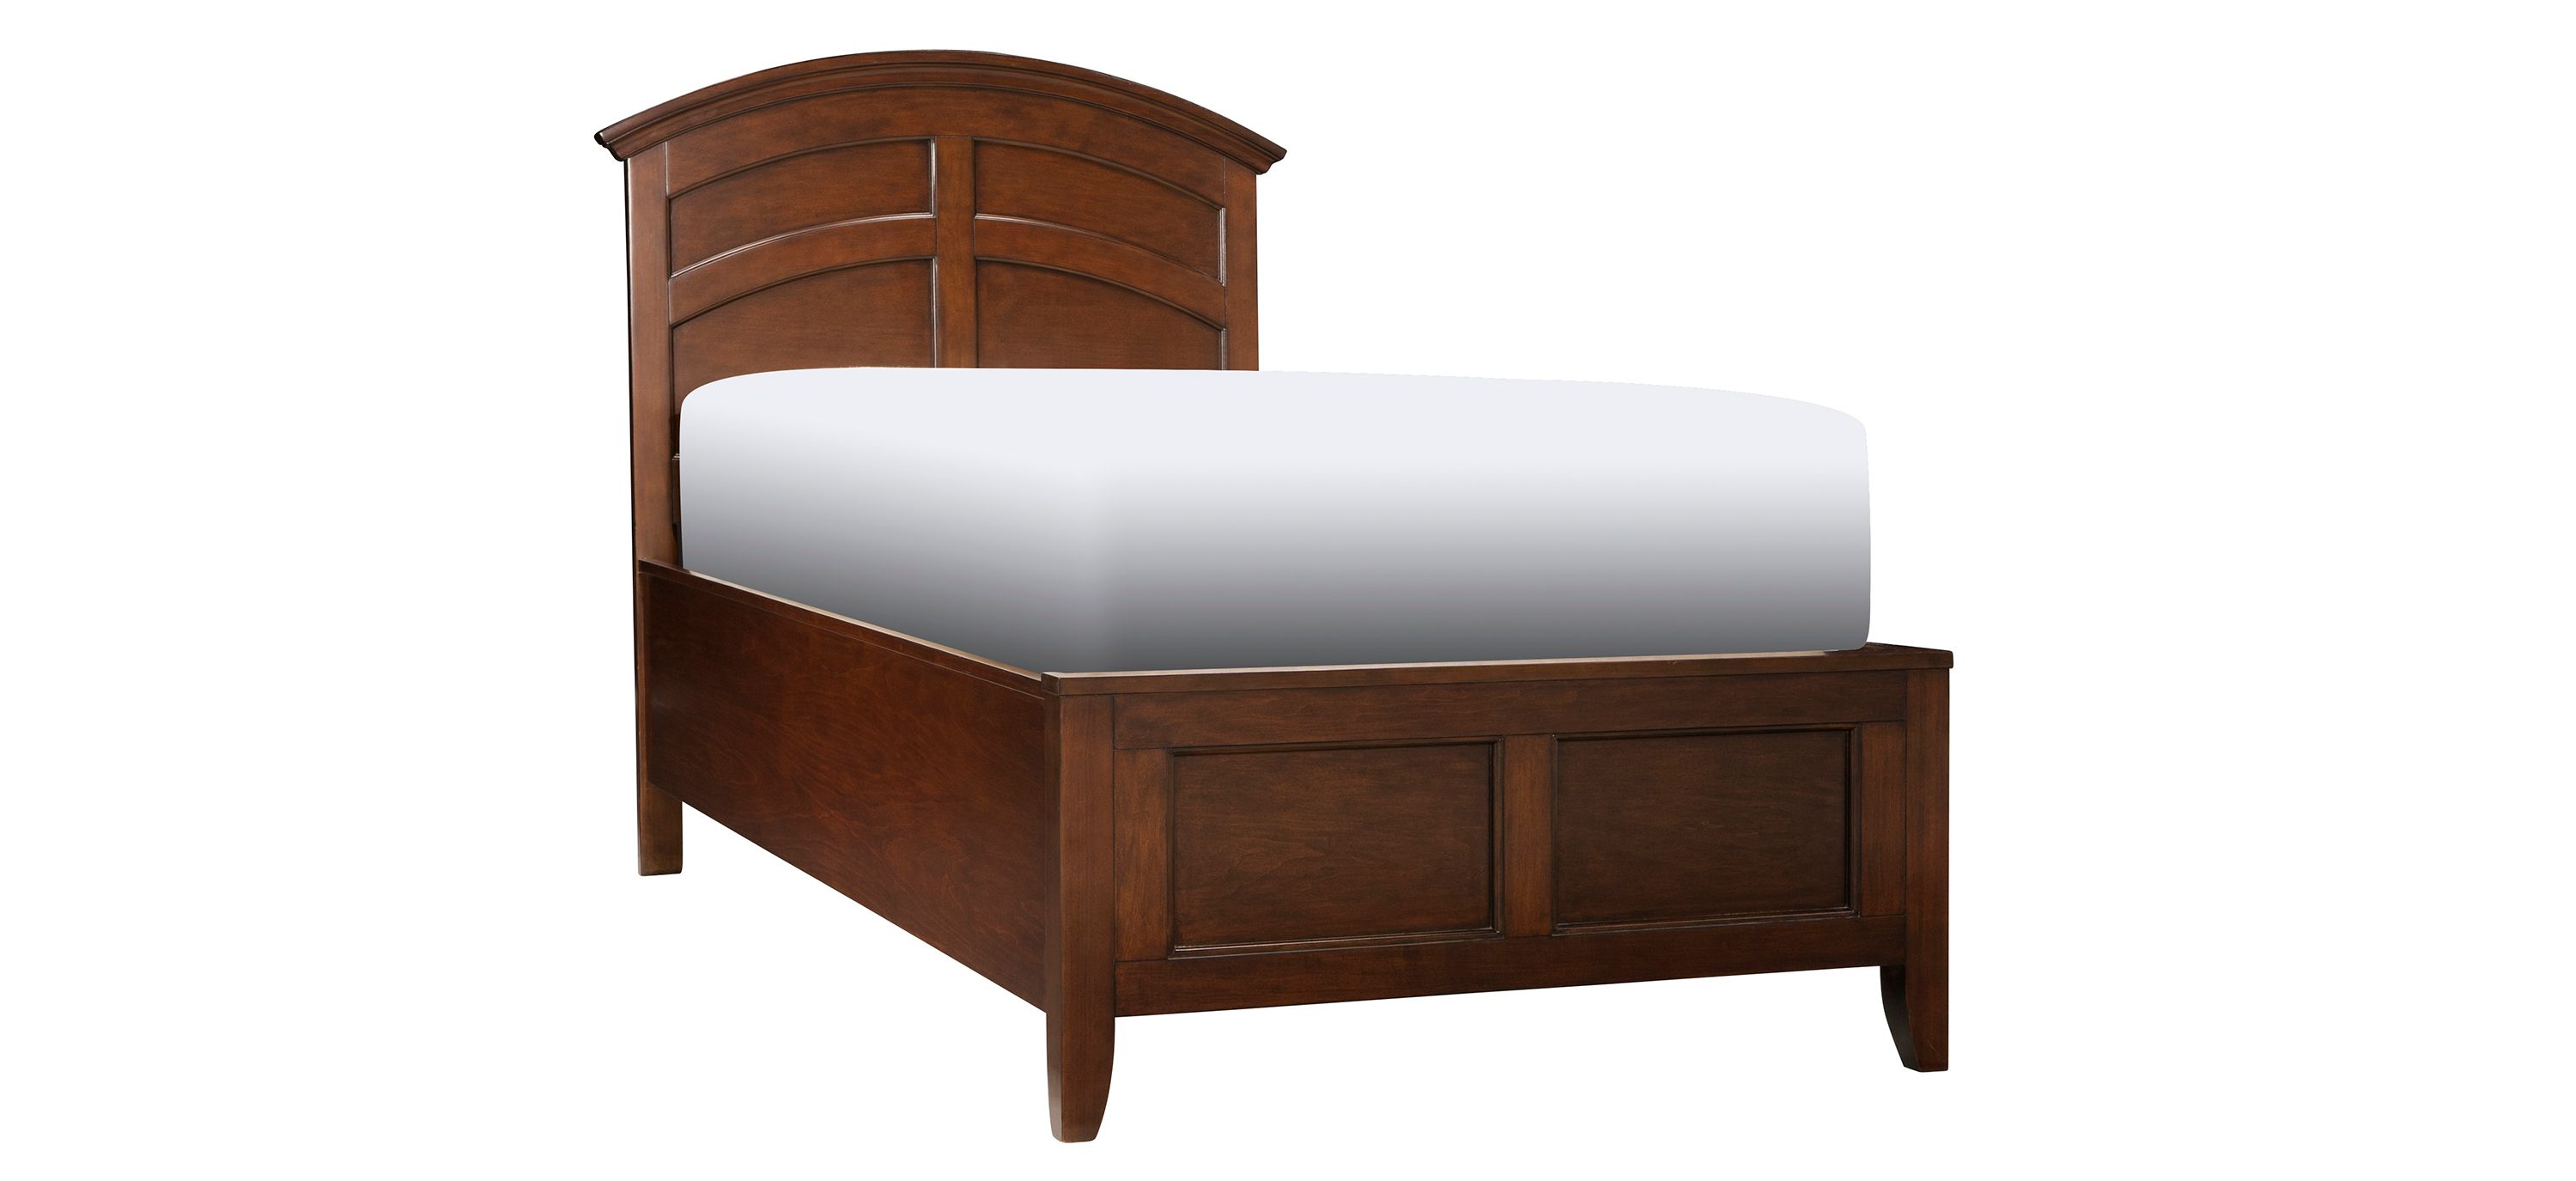 Kylie Youth Platform Bed